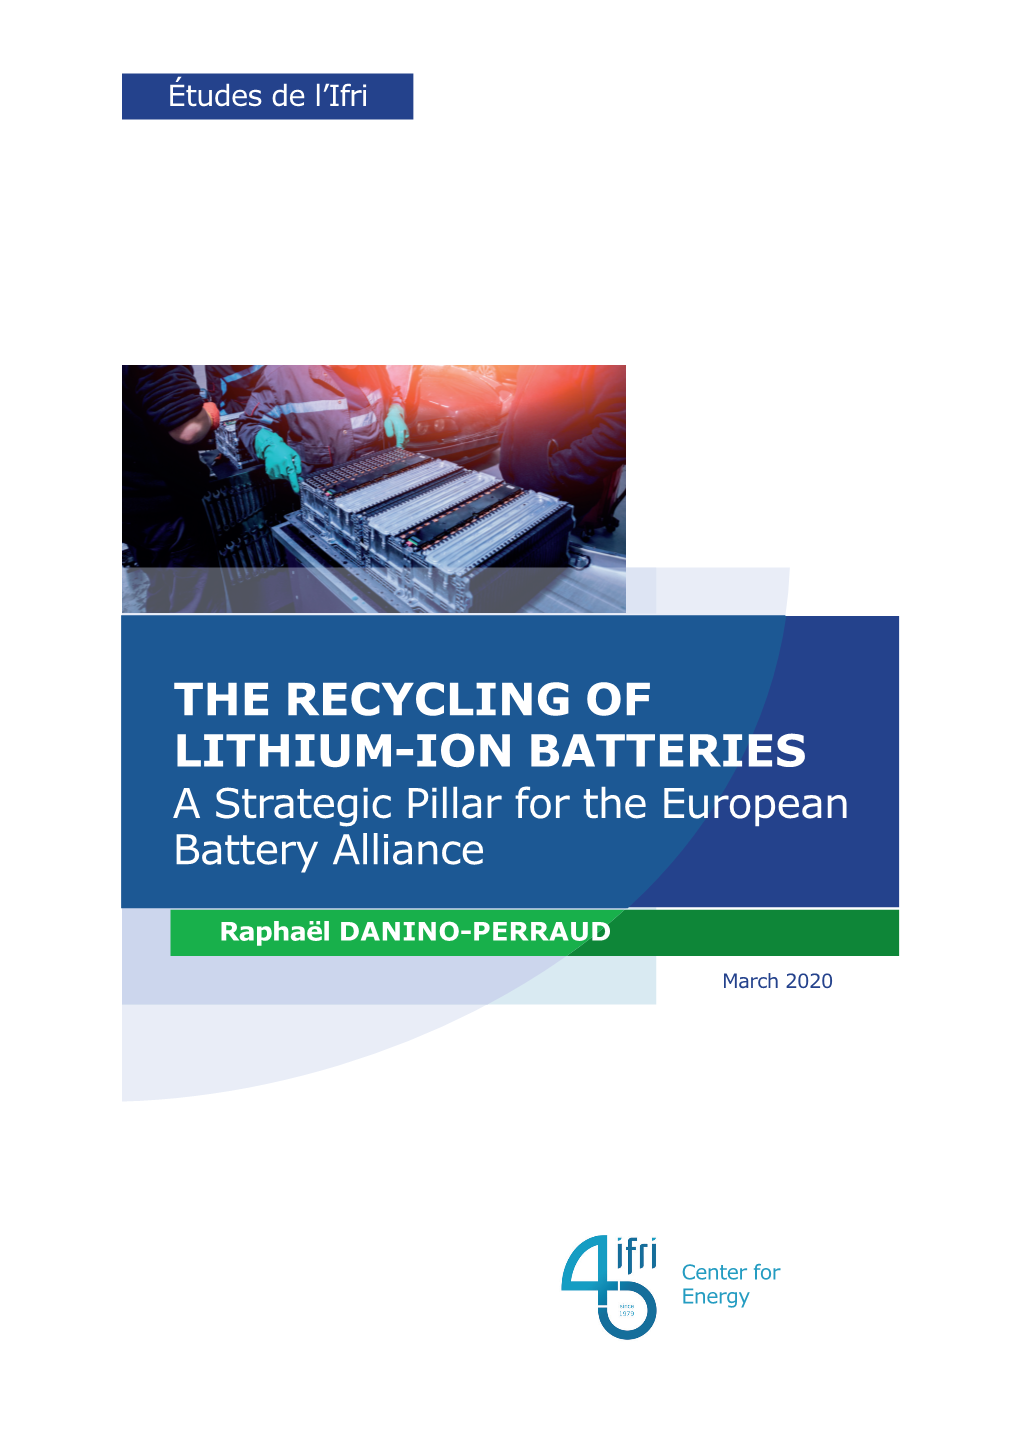 The Recycling of Lithium-Ion Batteries a Strategic Pillar for the European Battery Alliance